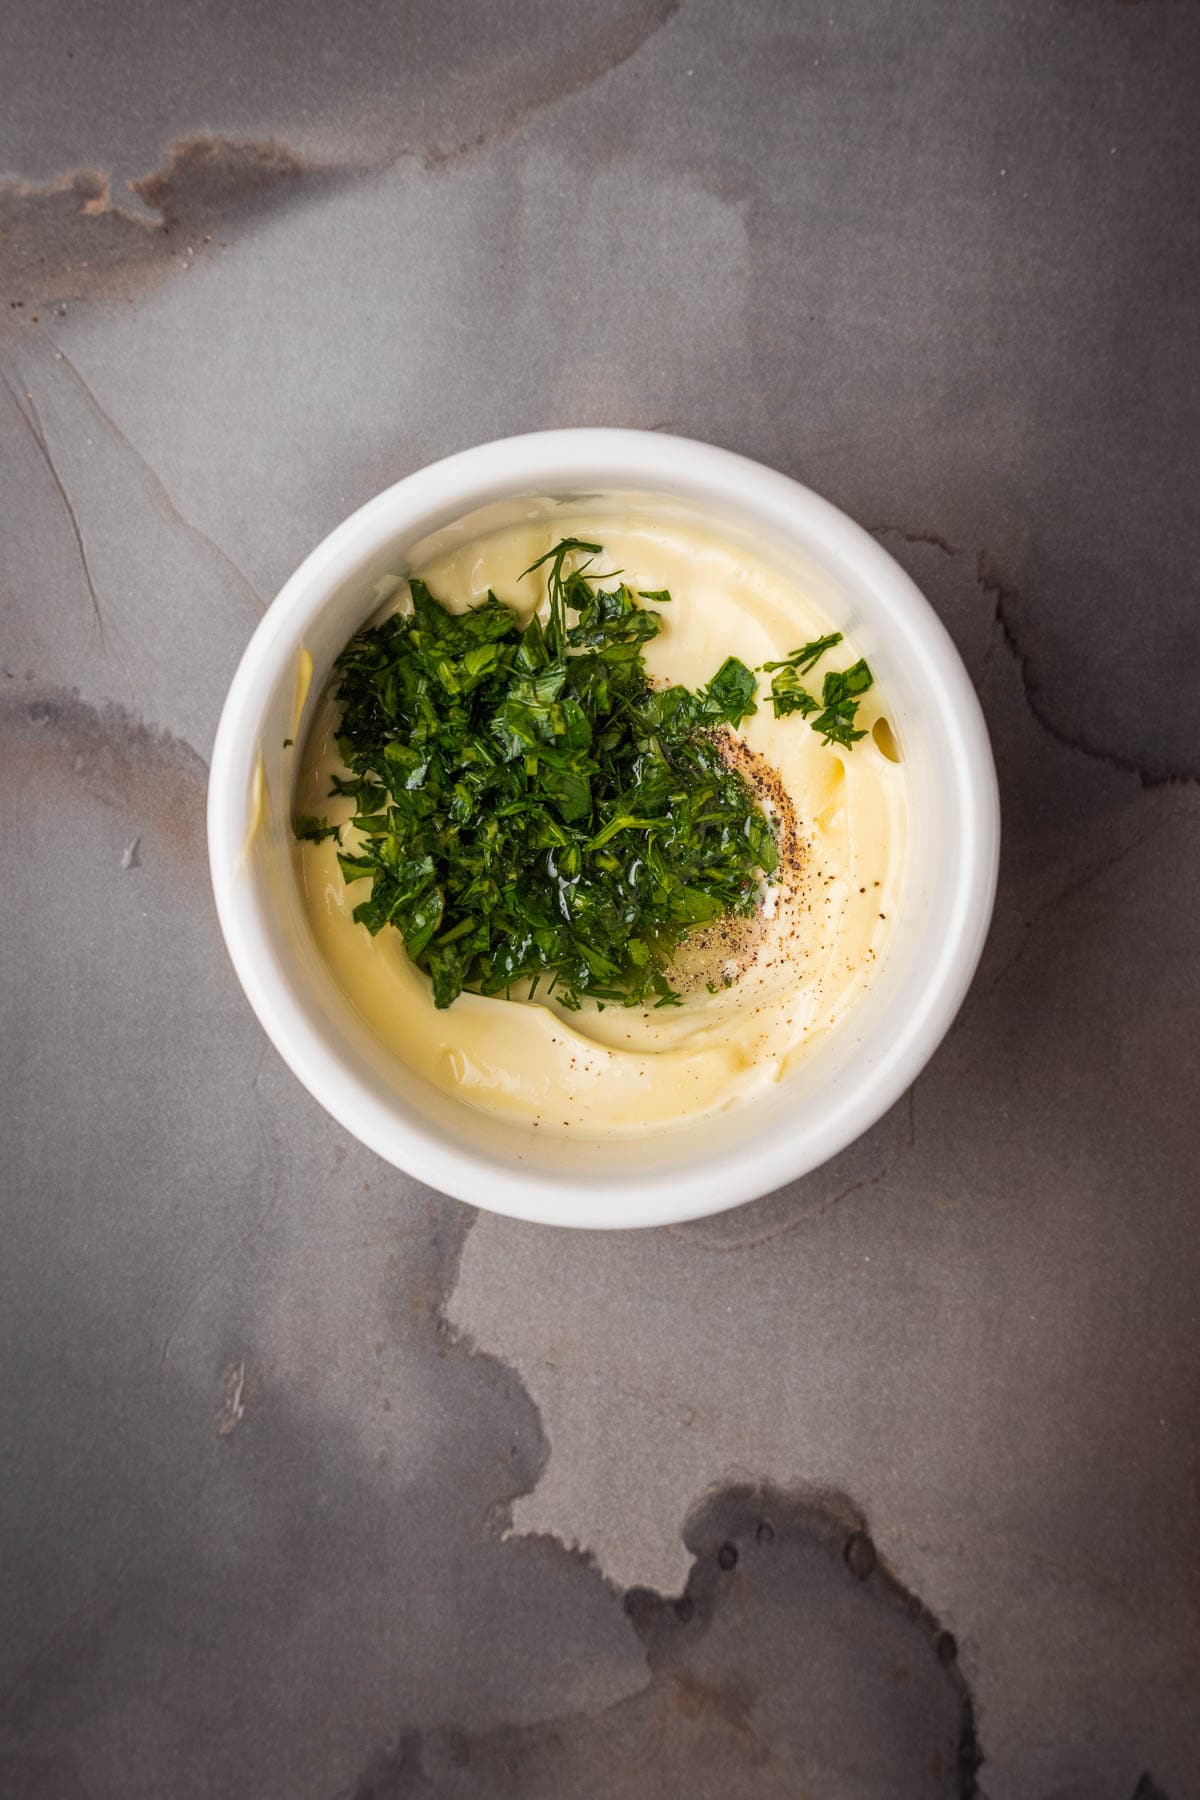 A bowl of aioli with herbs like parsley in it.